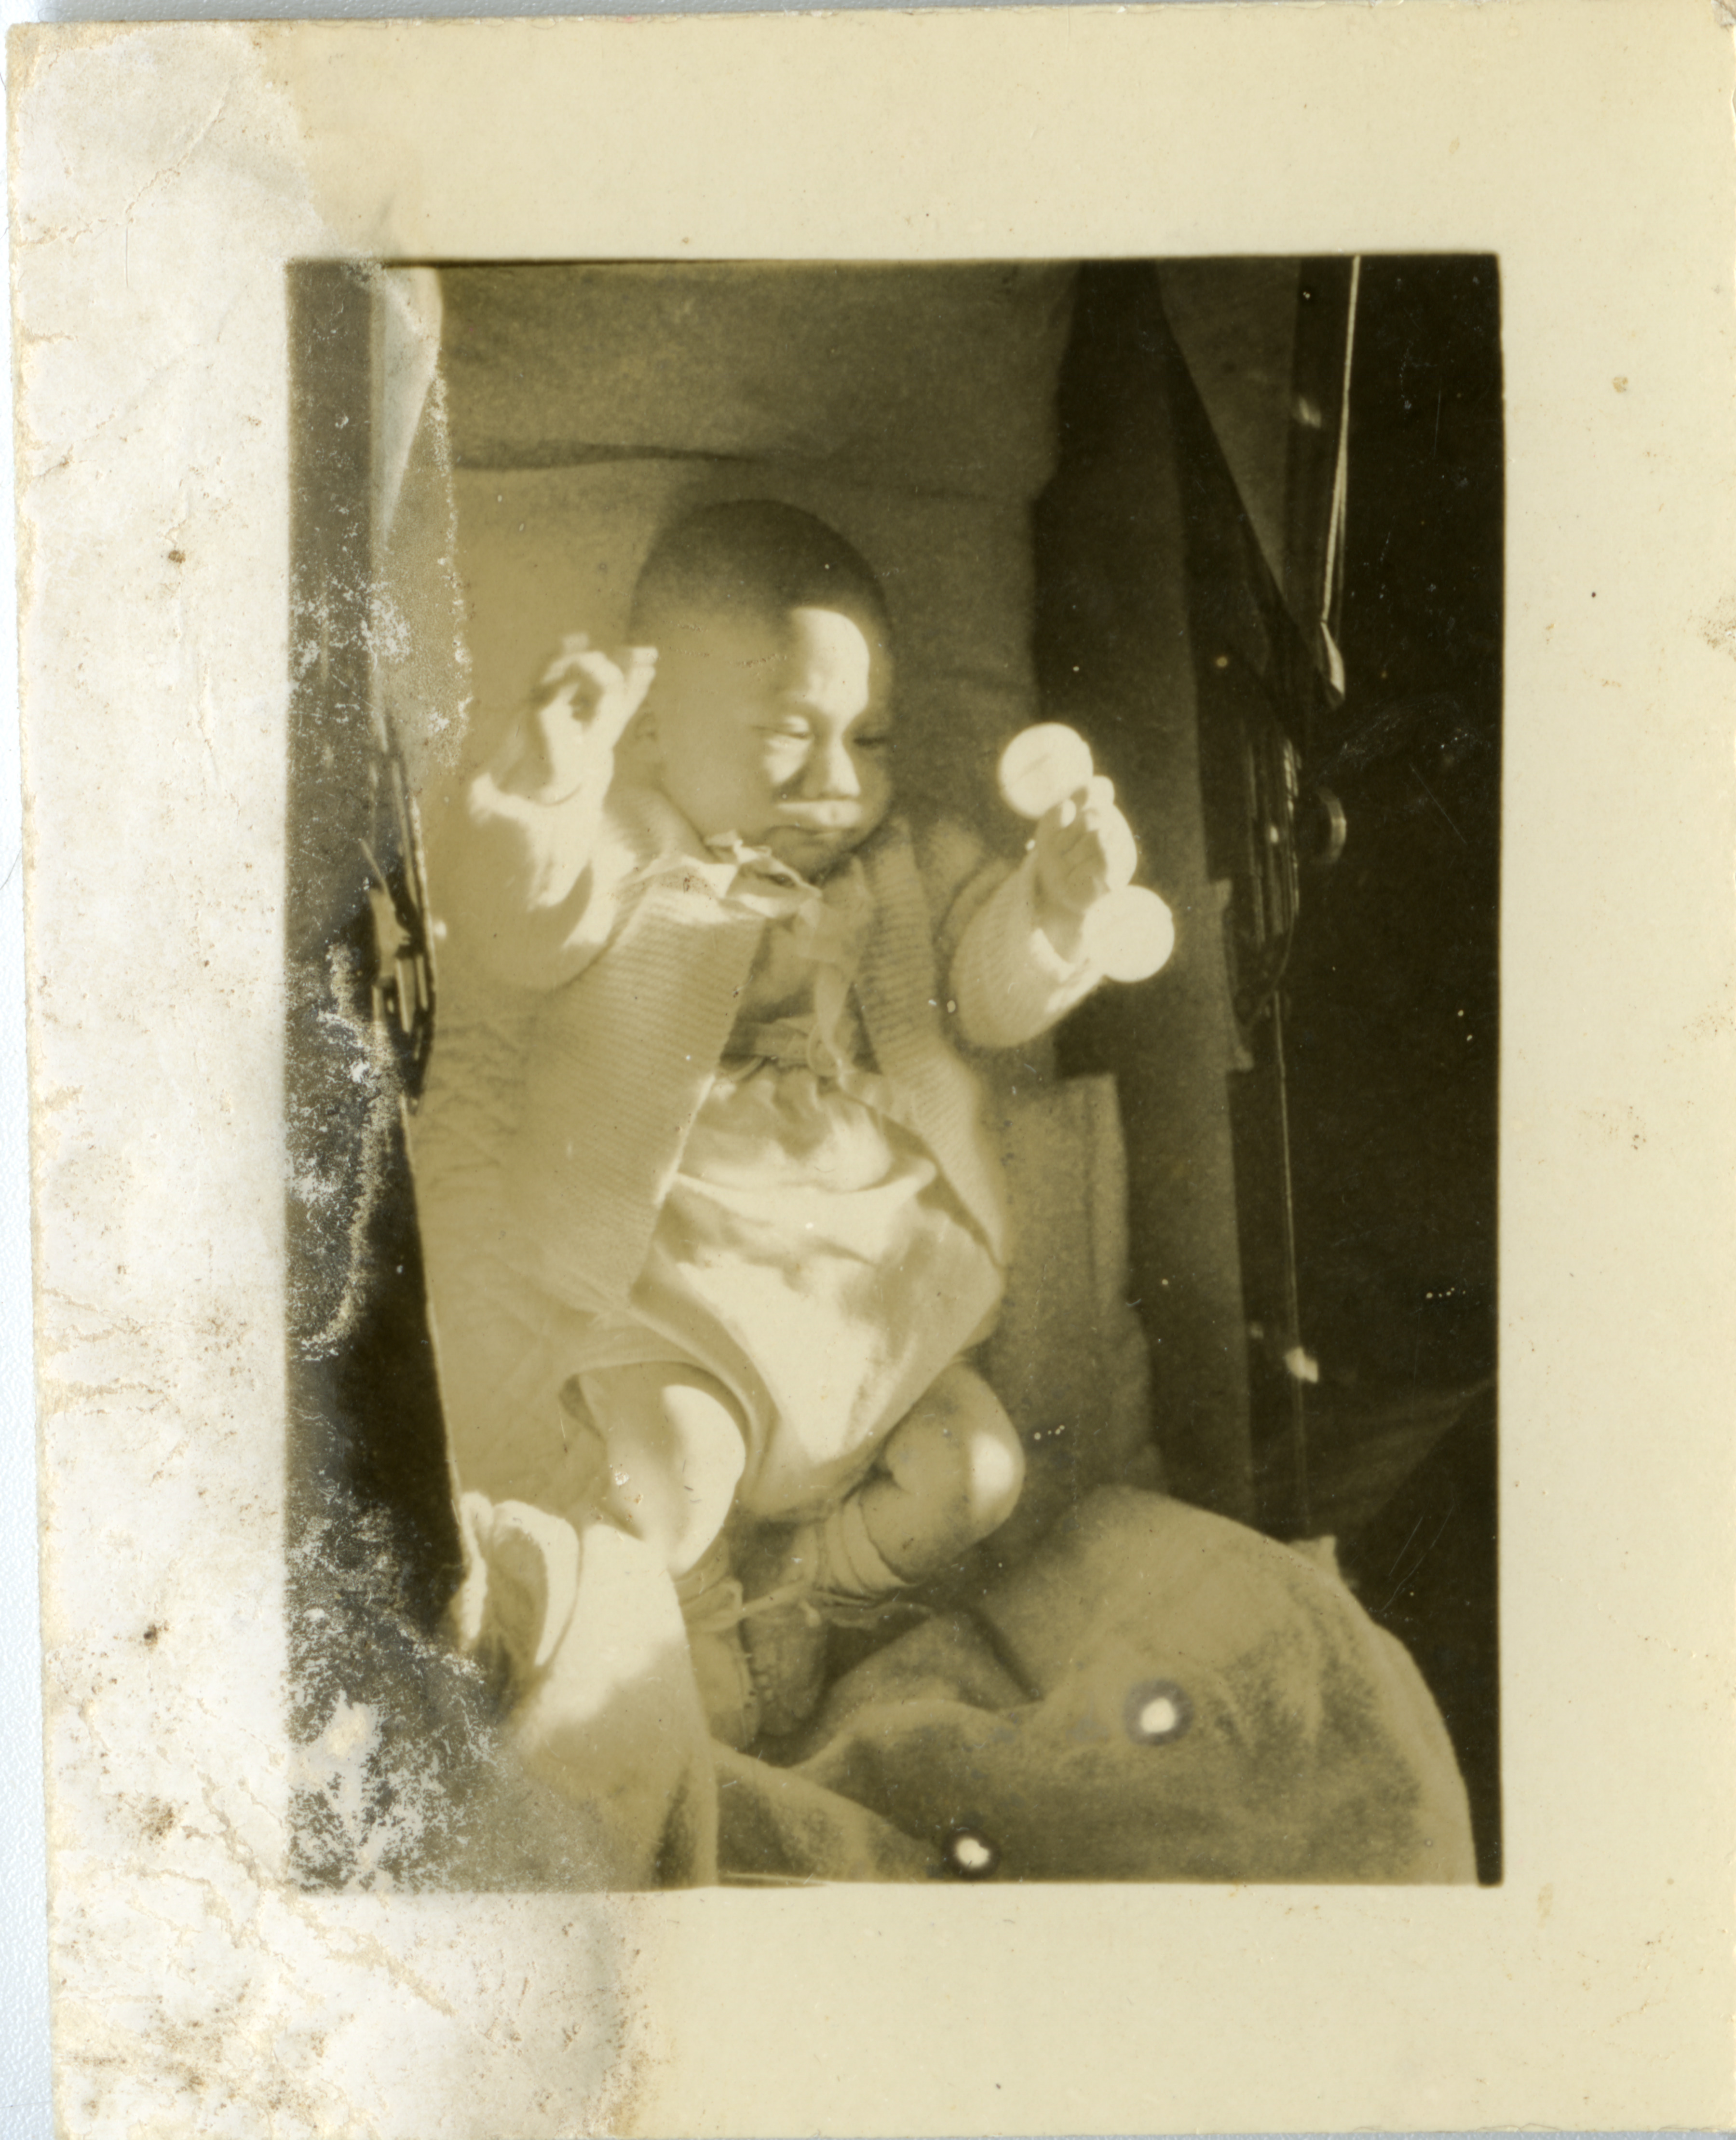 Michael Walz in a baby carriage, 1943 | The Digital Collections of the ...